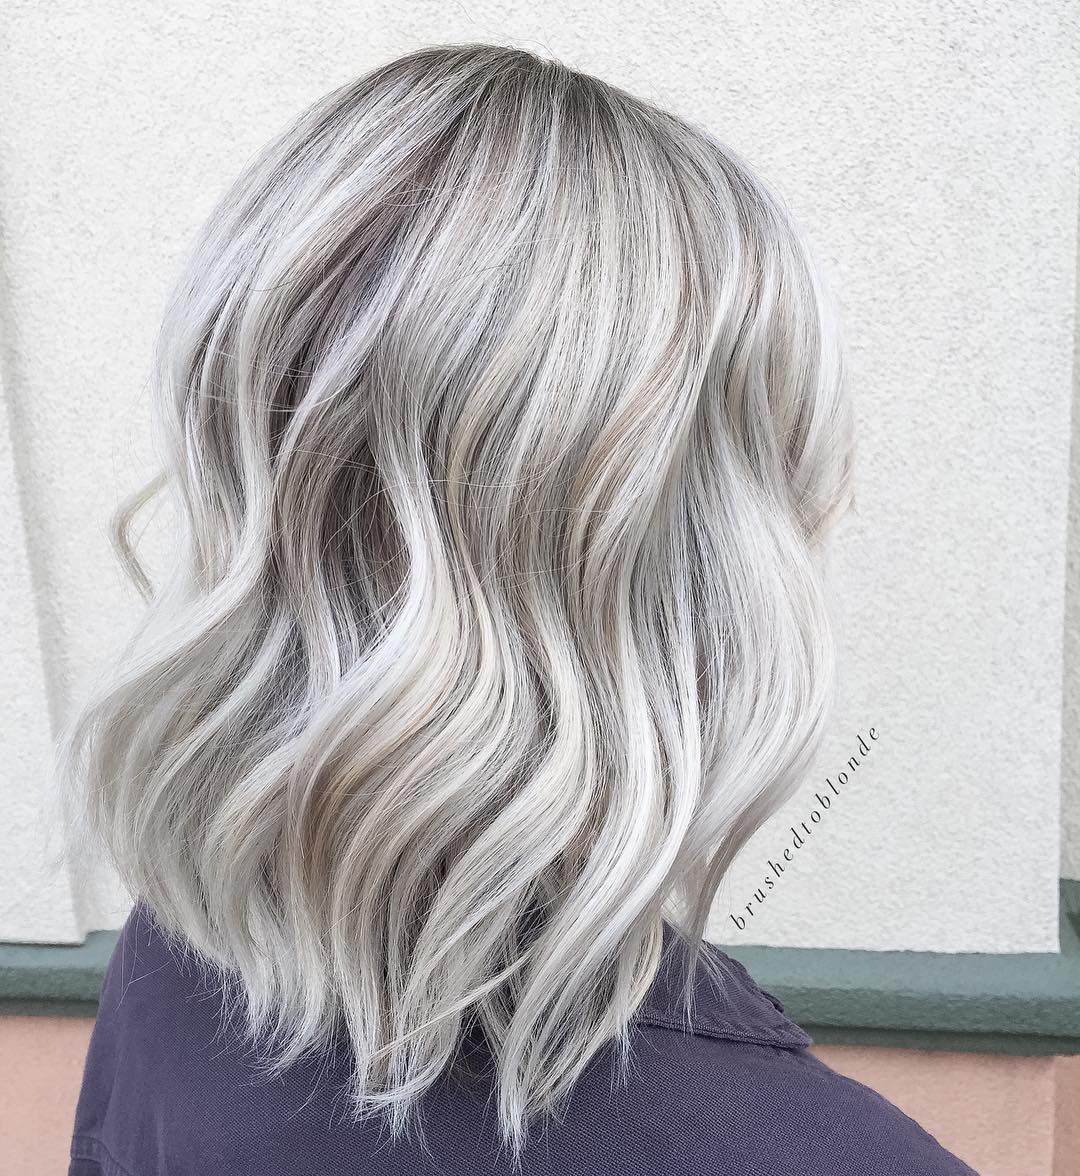 Blonde Balayage With White Highlights